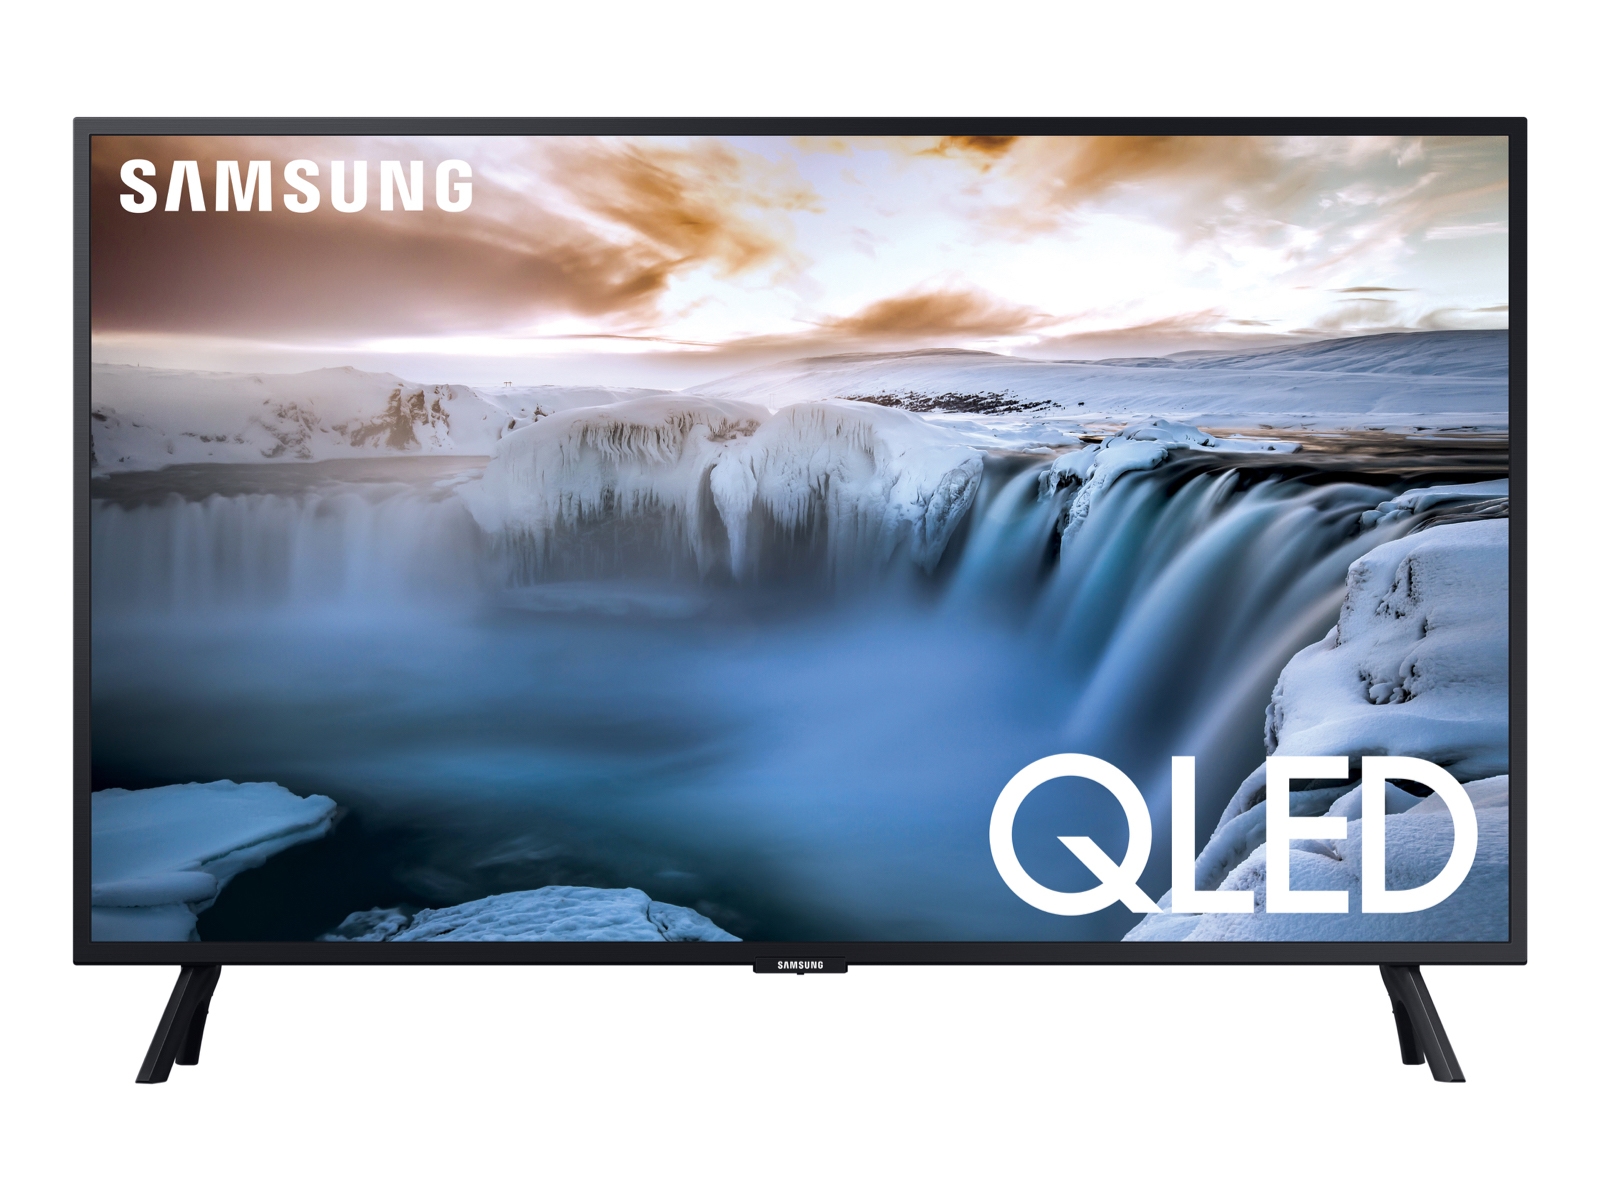 4K smart TVs are on sale: Save on Sony, RCA, Samsung, LG, and more